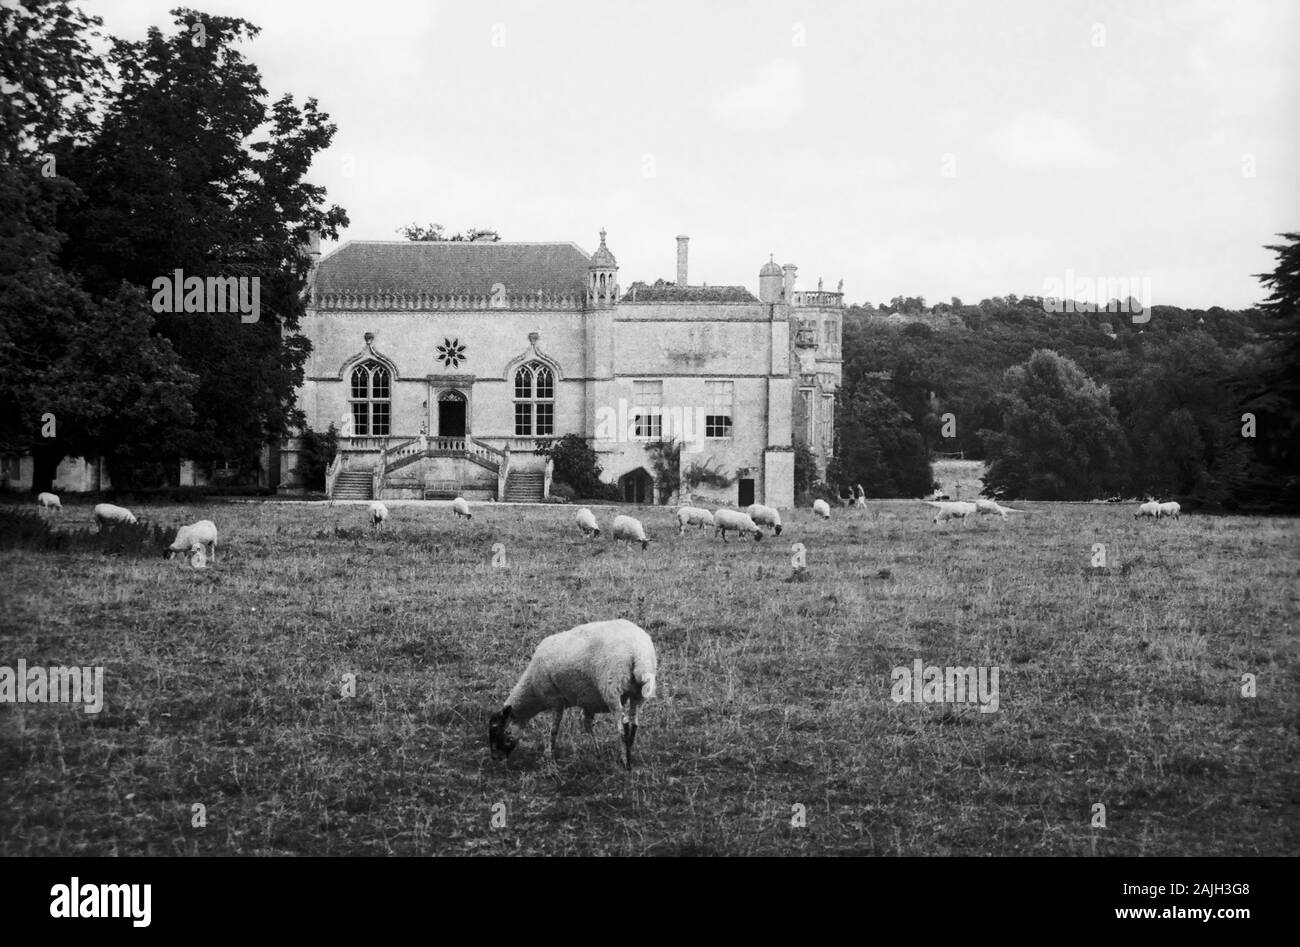 Lacock Abbey, Wiltshire, England, UK: main entrance with sheep grazing in foreground,   Old black and white film photograph, circa 1990 Stock Photo